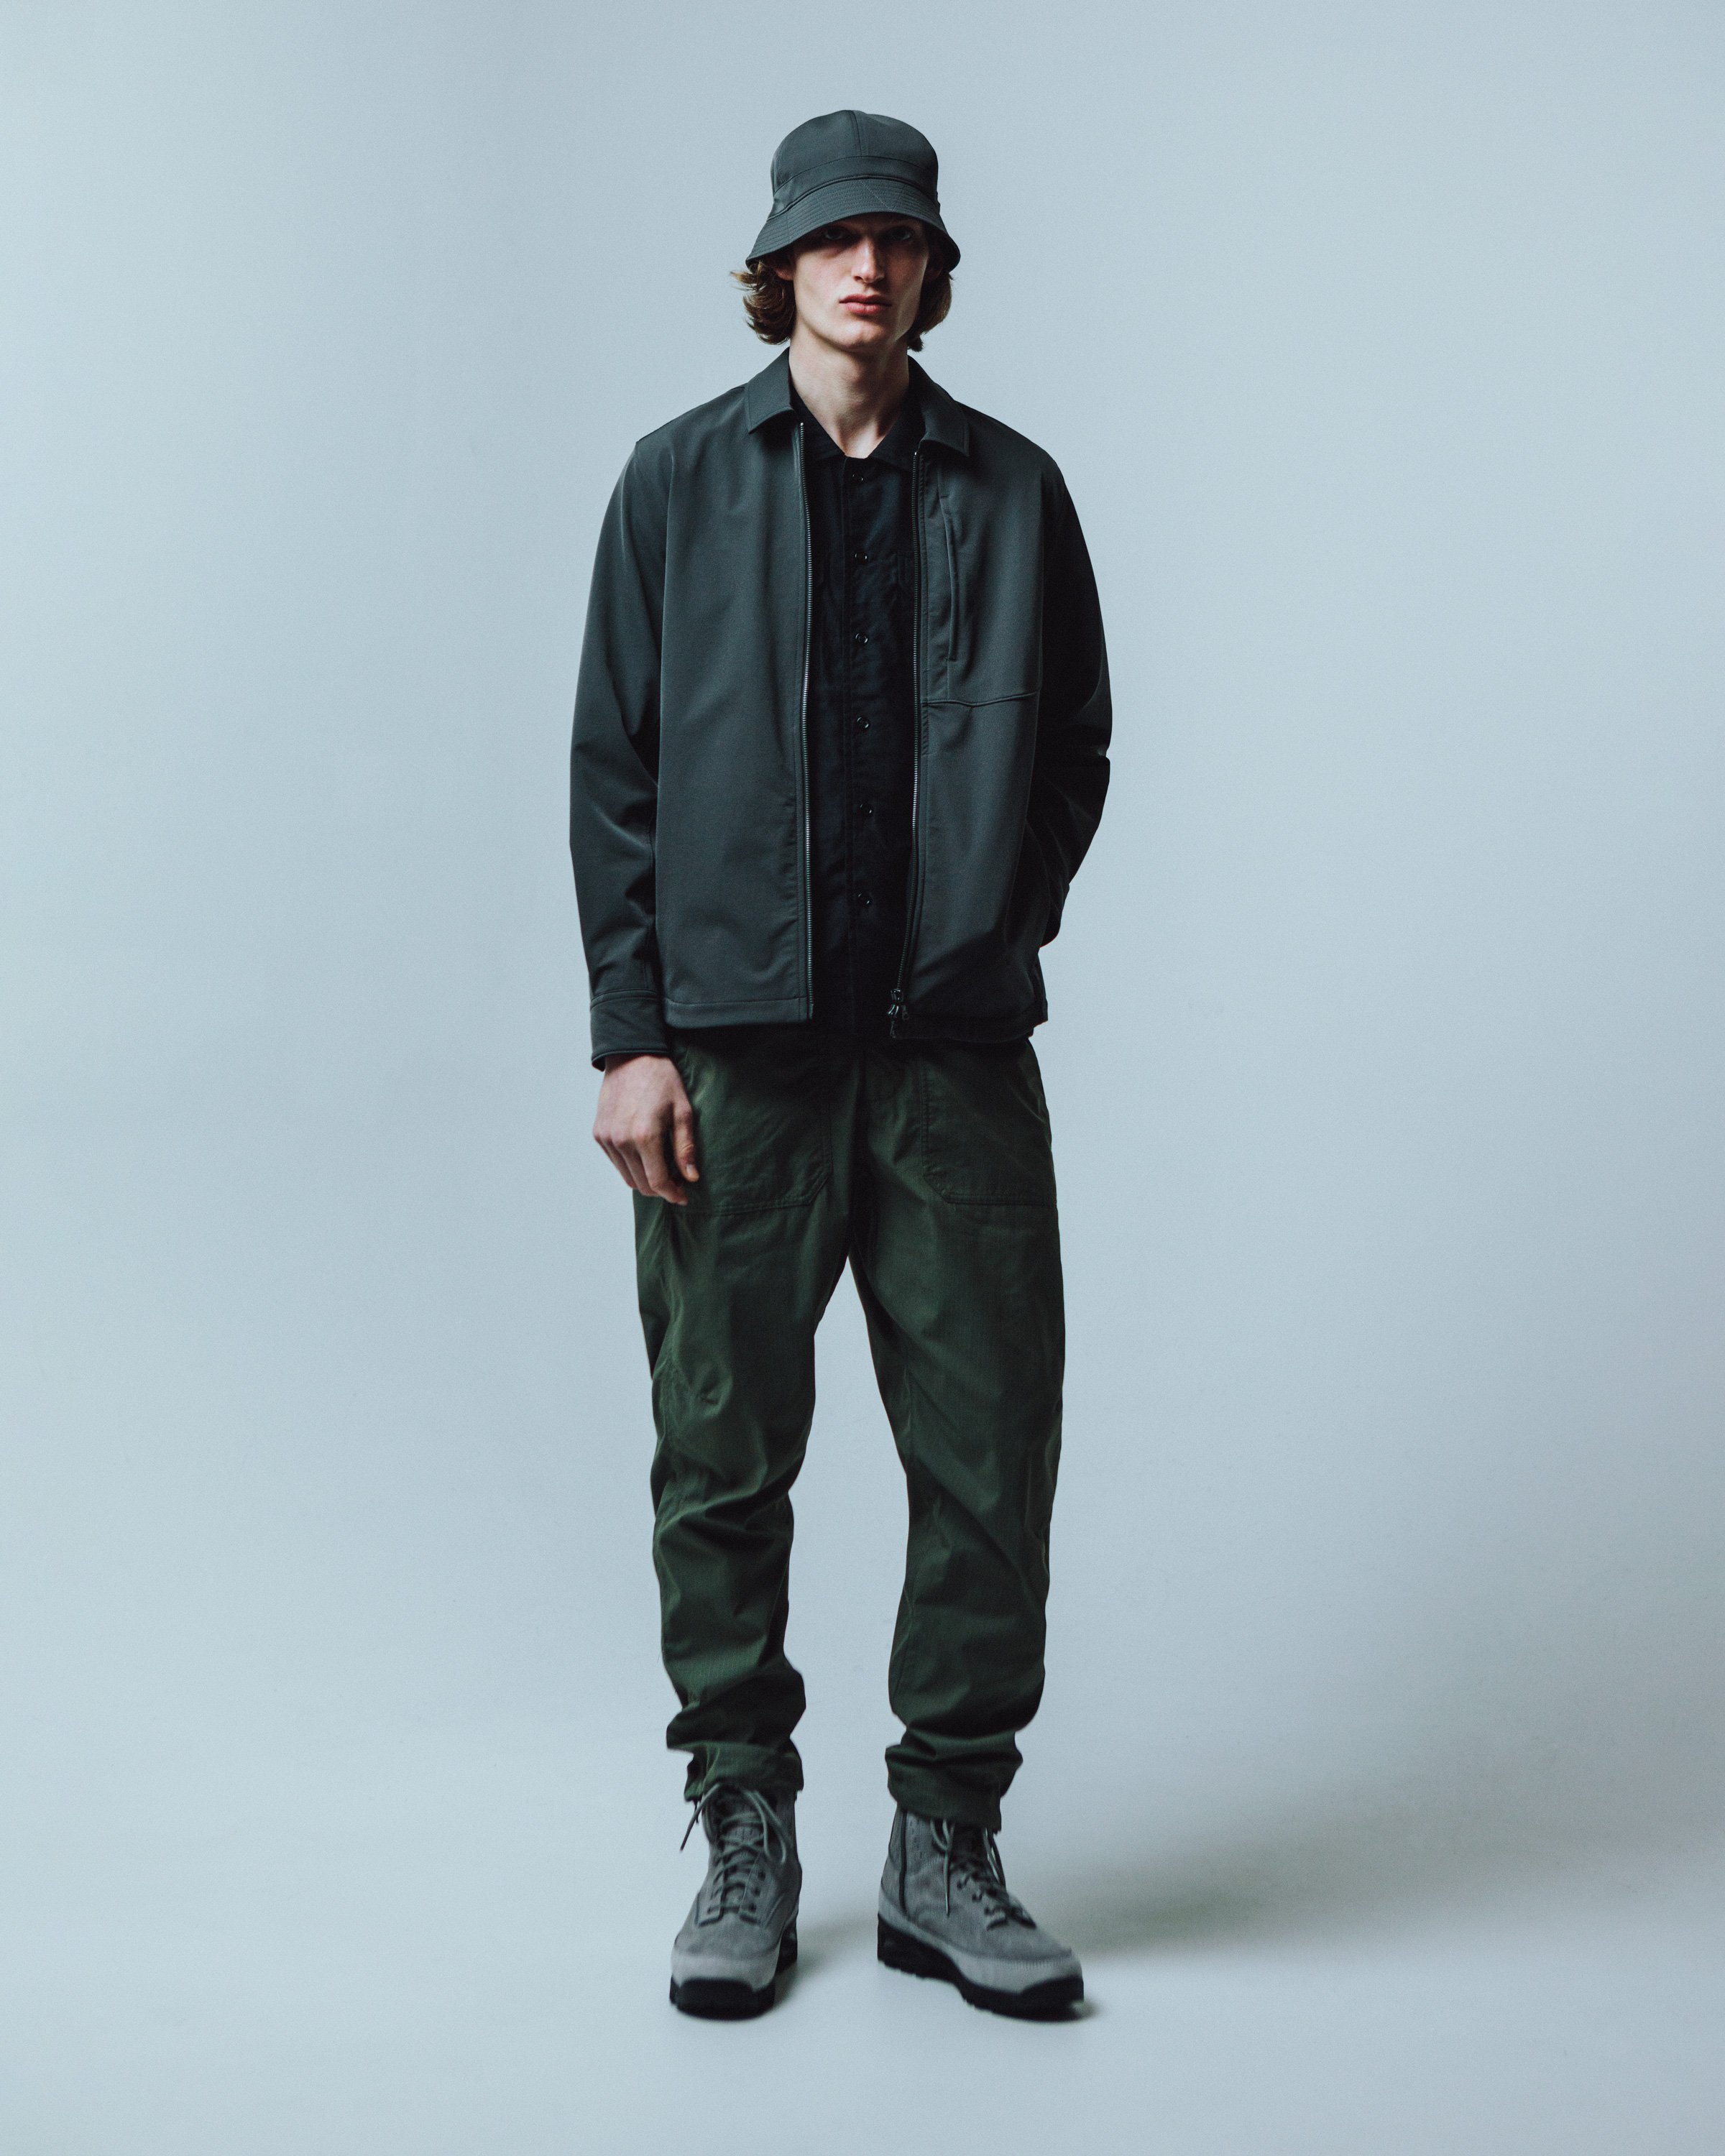 HAVEN Shines a Light on its Spring/Summer '22 Wares in Latest Editorial ...